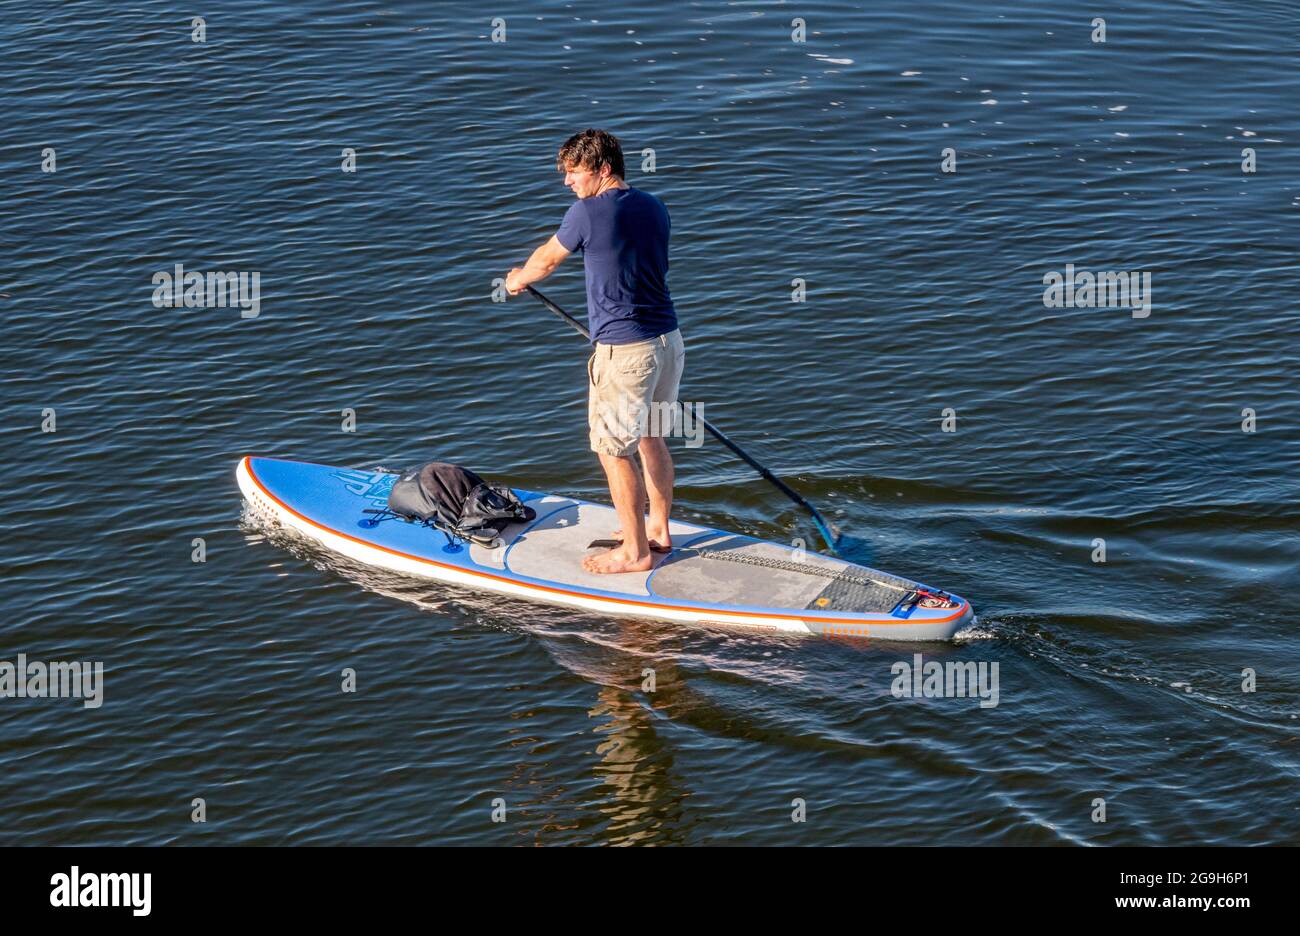 a man on a stand-up paddle board on the sea paddling wearing shorts and keeping balance. Stock Photo